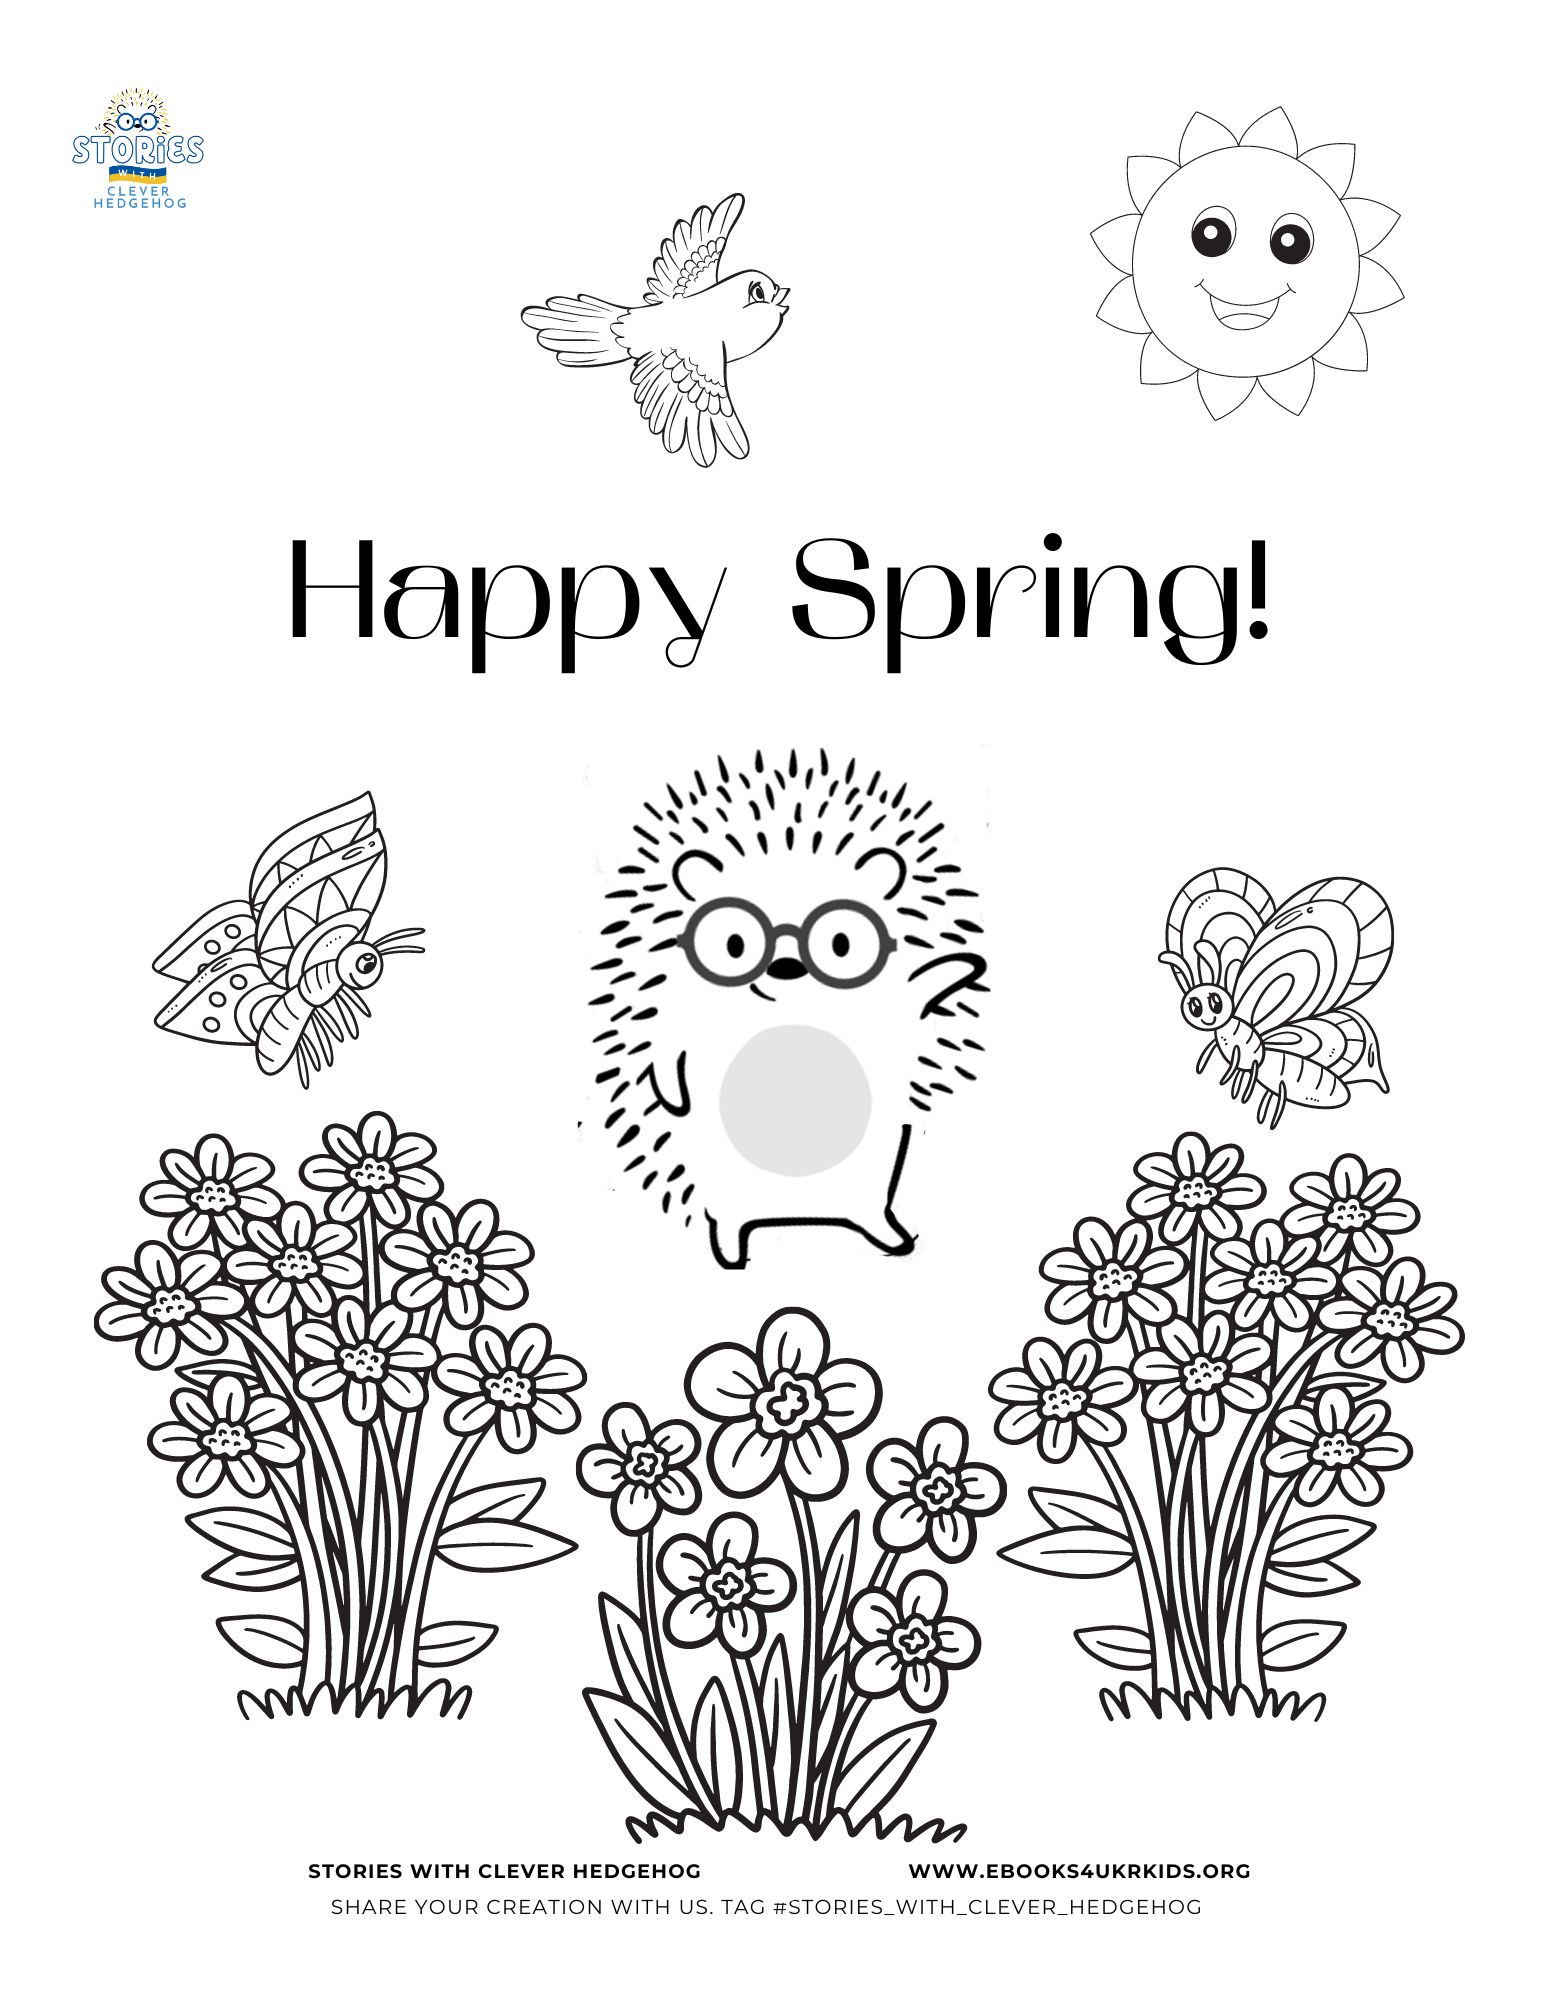 Coloring page for kids, Stories with Clever Hedgehog, Happy spring coloring page